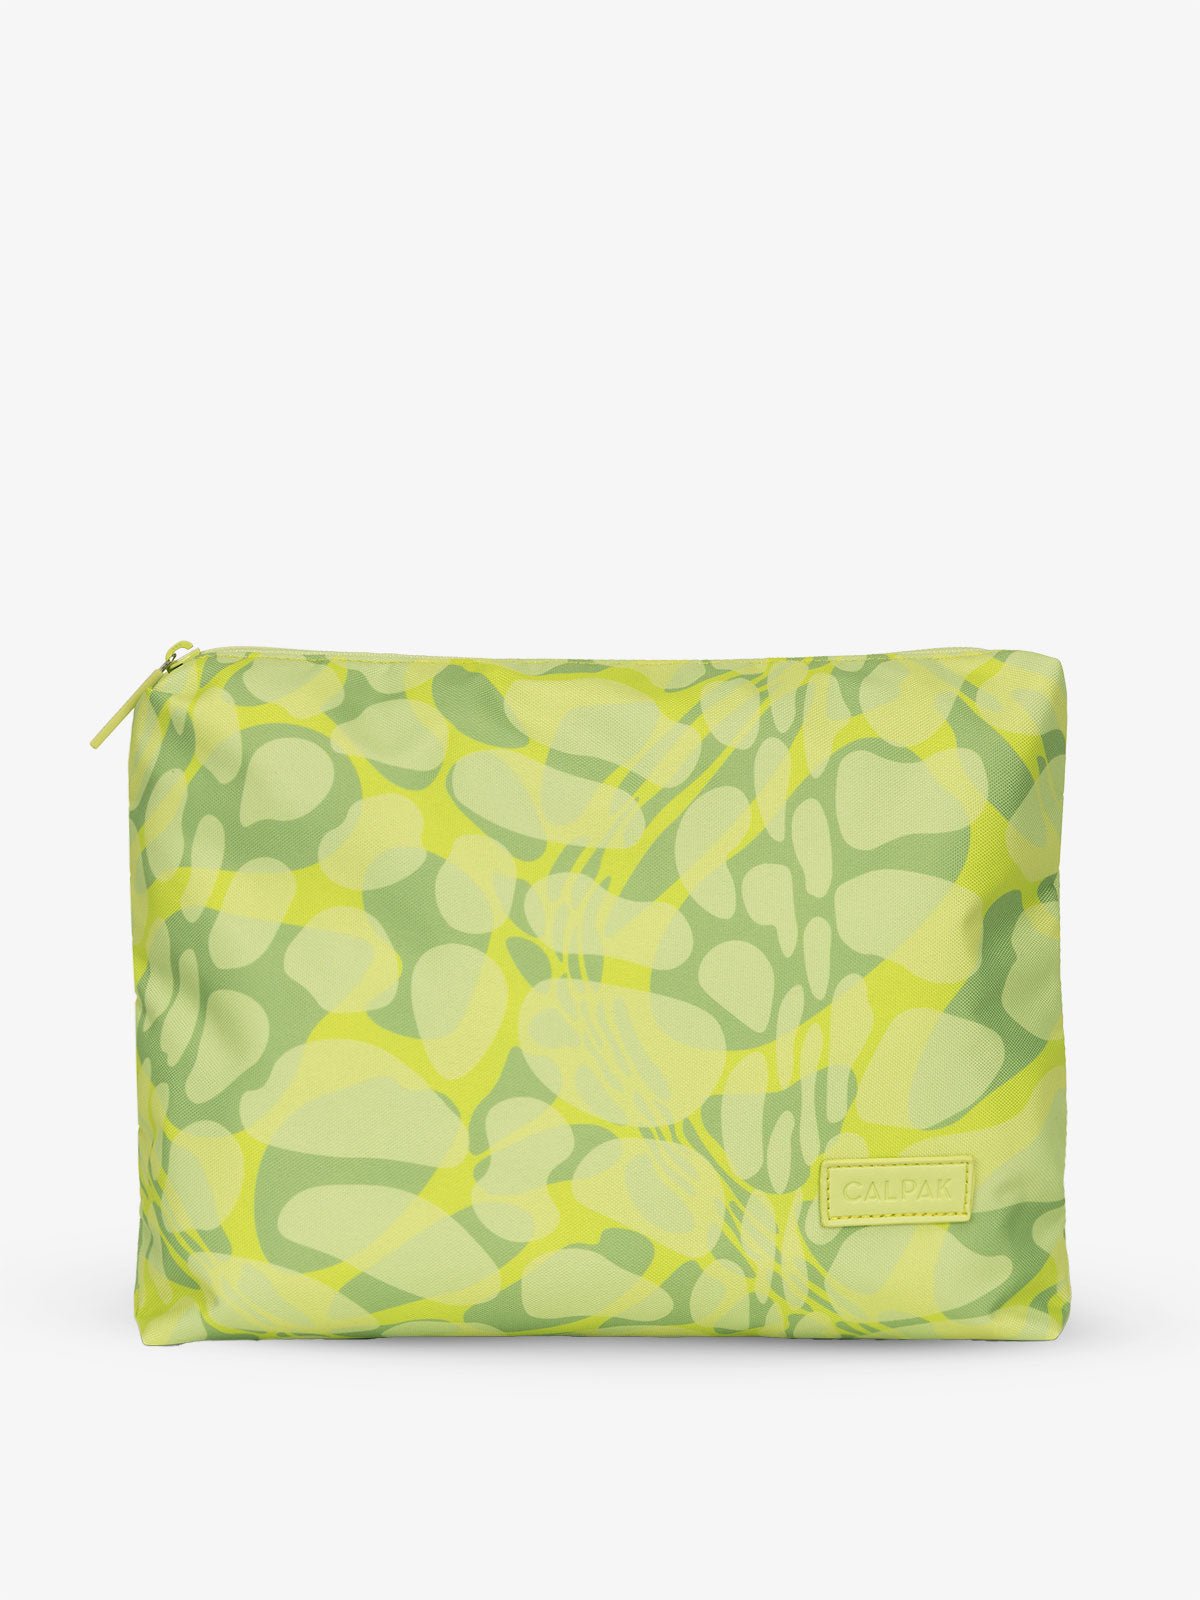 CALPAK water-resistant travel pouch for luggage in green viper print